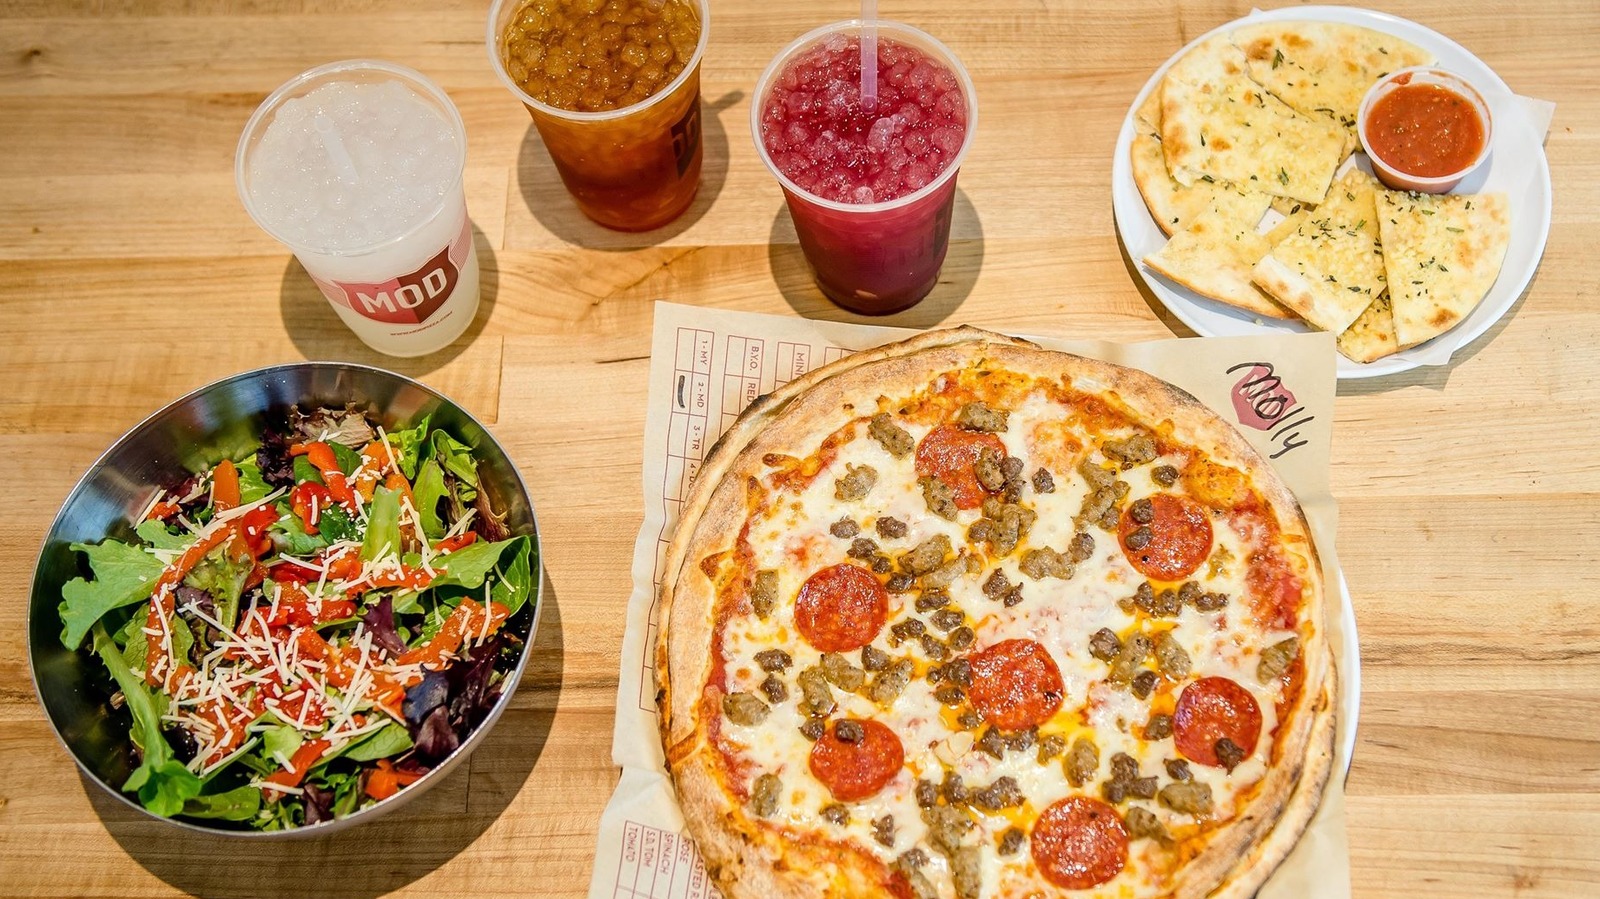 MOD Pizza Menu Items Ranked From Worst To Best